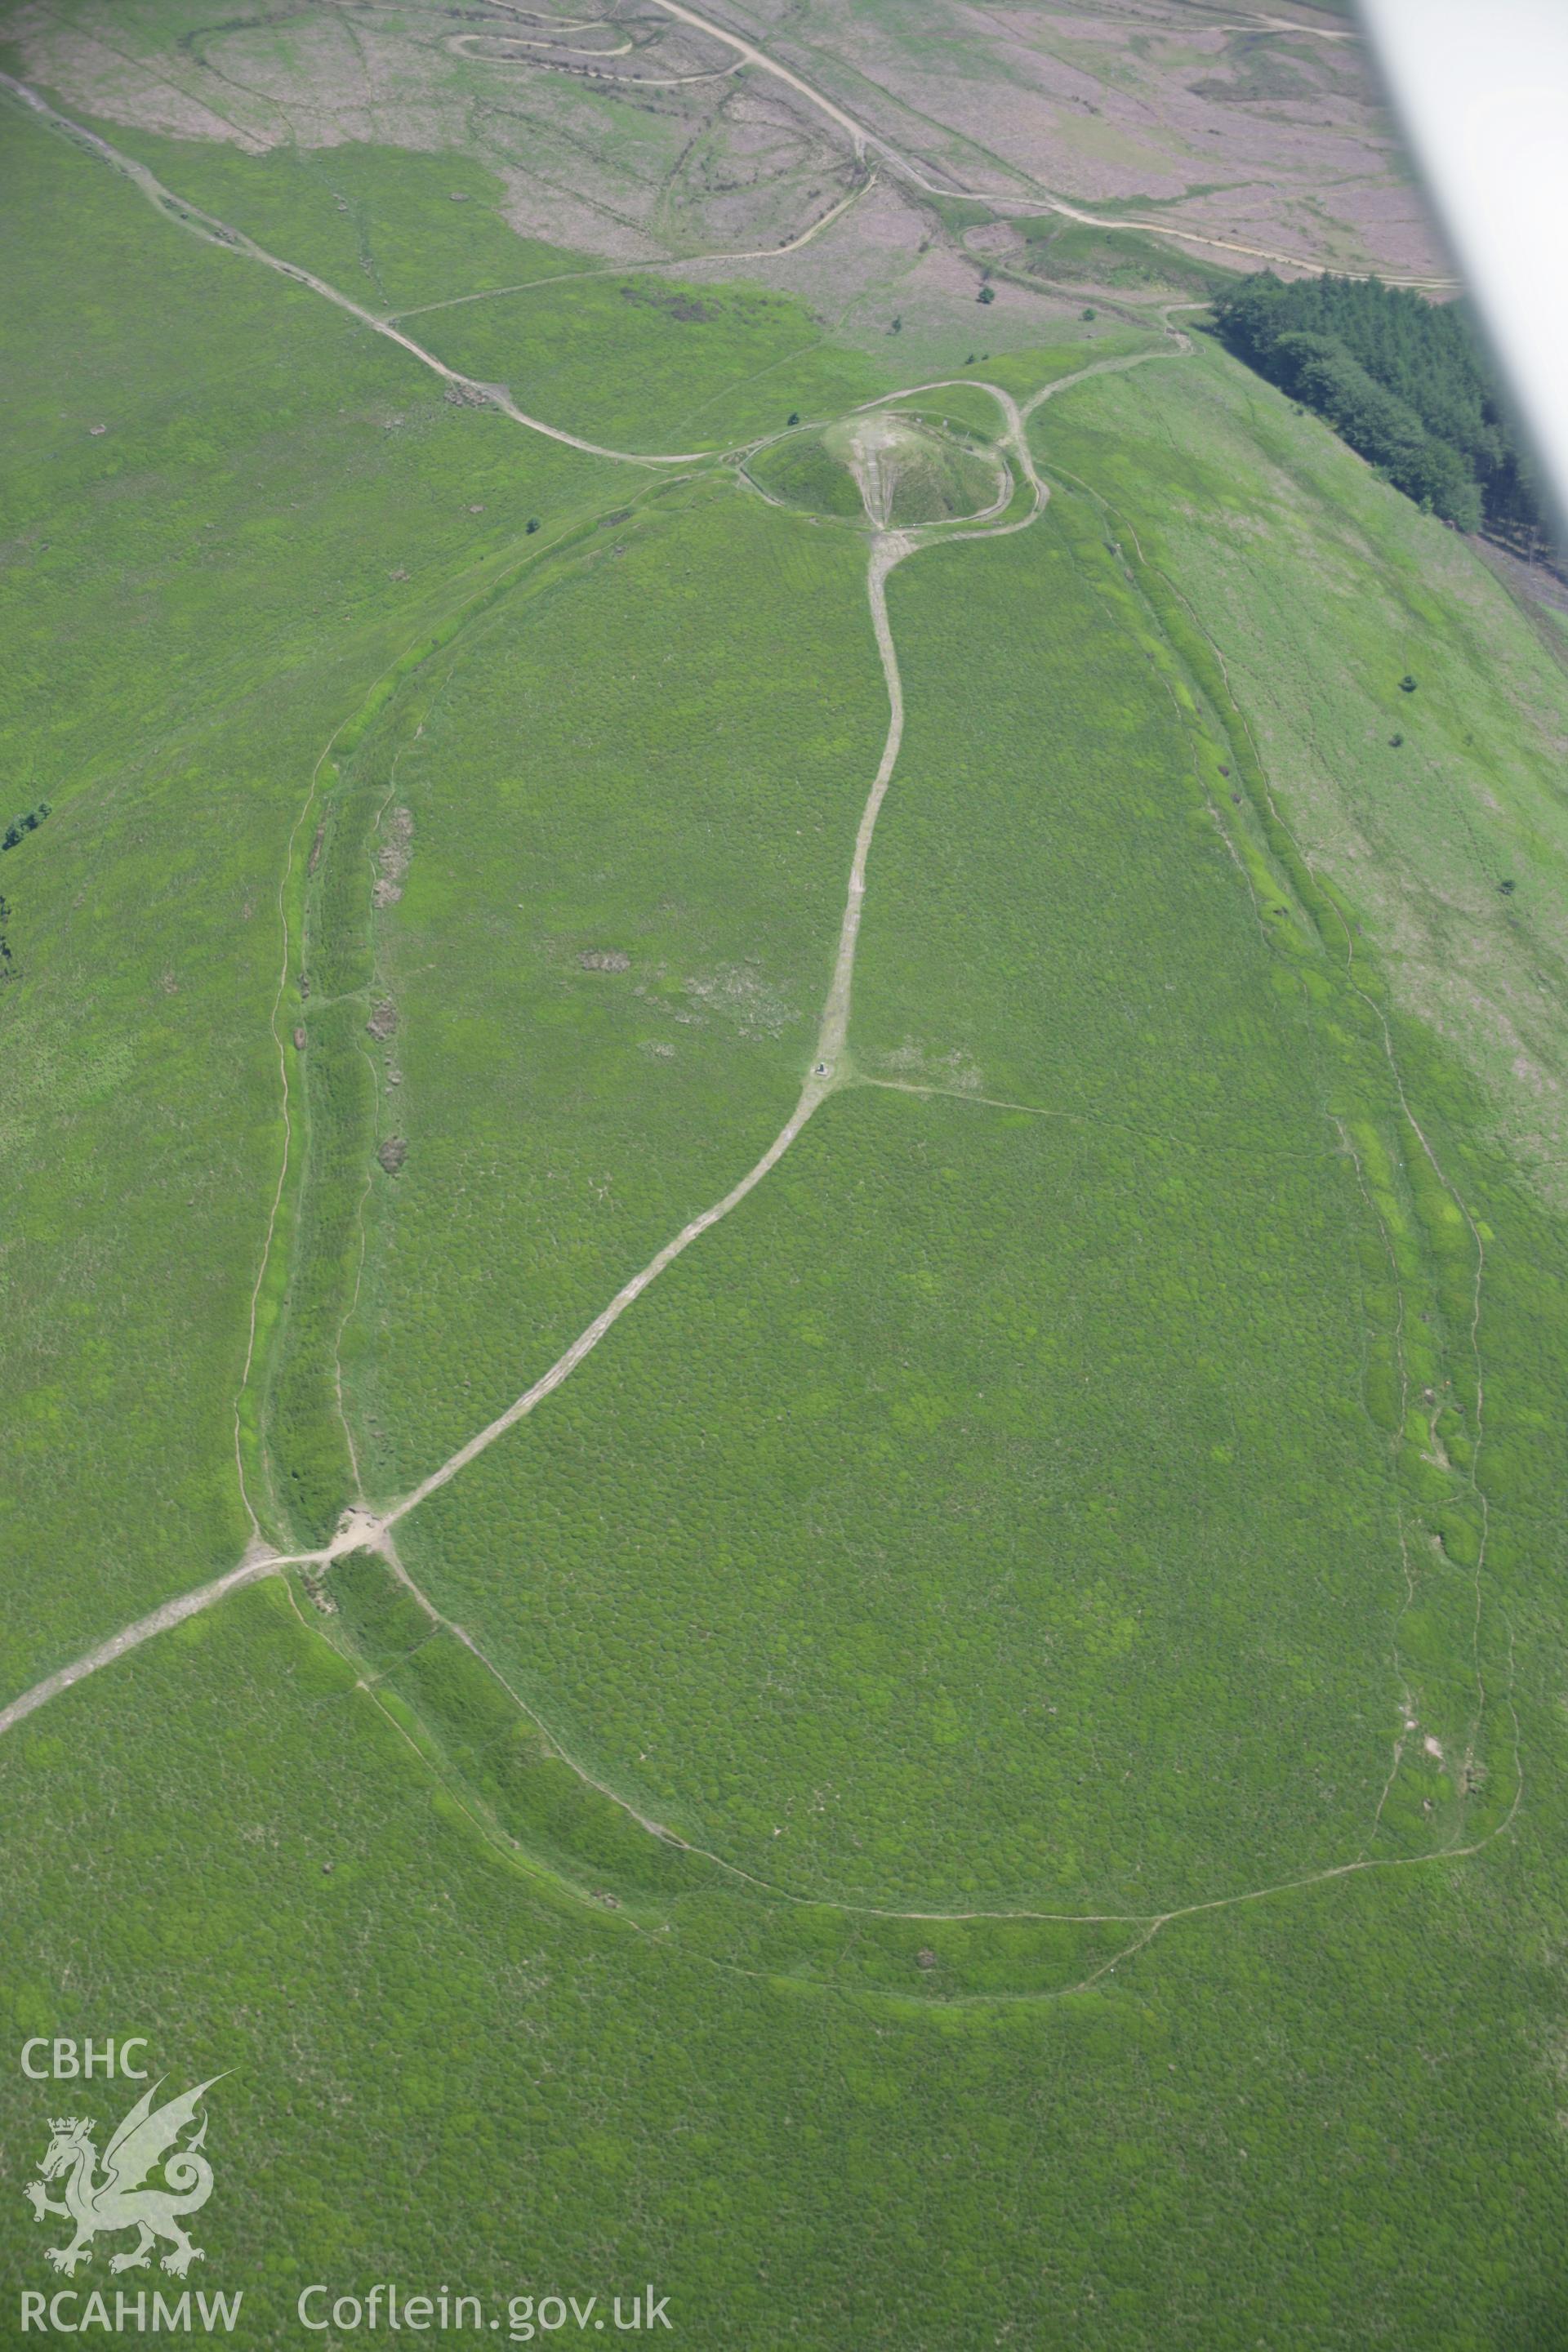 RCAHMW colour oblique aerial photograph of Twmbarlwm Castle and possible hillfort from the west. Taken on 09 June 2006 by Toby Driver.